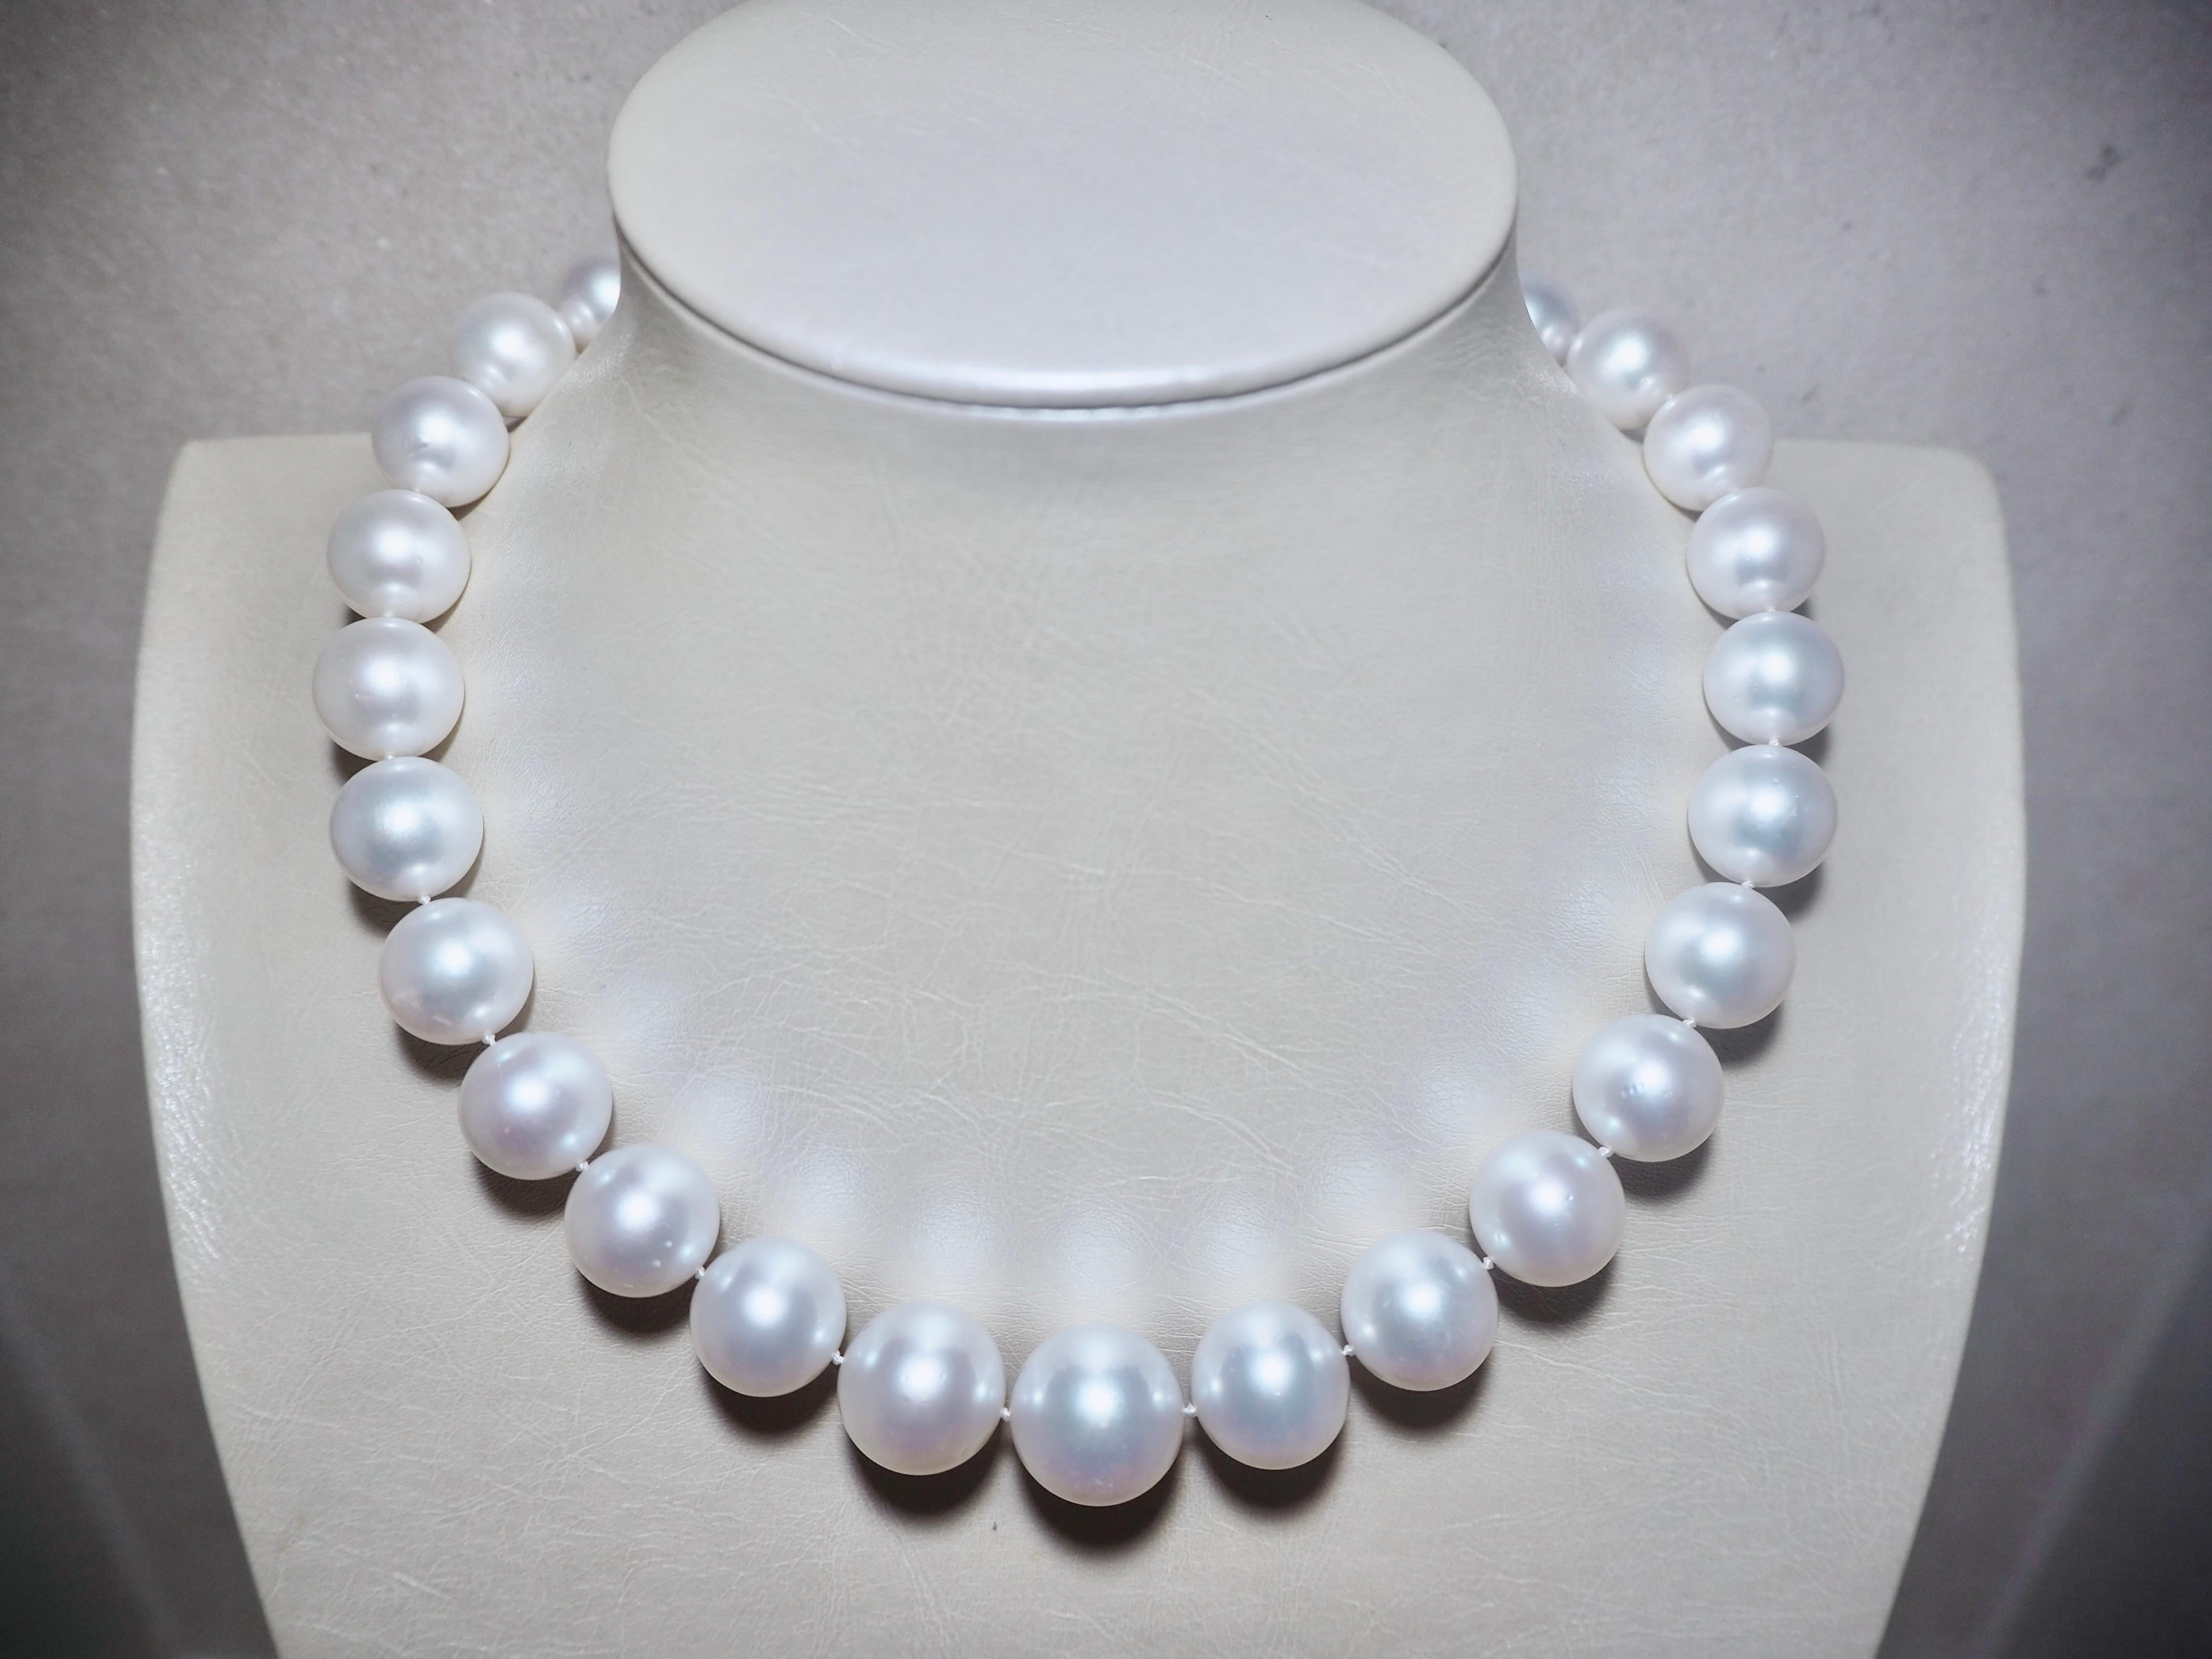 Ocean South Sea Pearl Necklace - 29 Pearls
18mm 18K white gold Clasp Featuring 5,44 Carat 188 Round Brilliant Diamonds.
18x13,5mm mm Australian Cultured South Sea Pearls 

Necklace Metal Finish: High Polish 
Total Item Weight (g): 137,6
Color Grade: